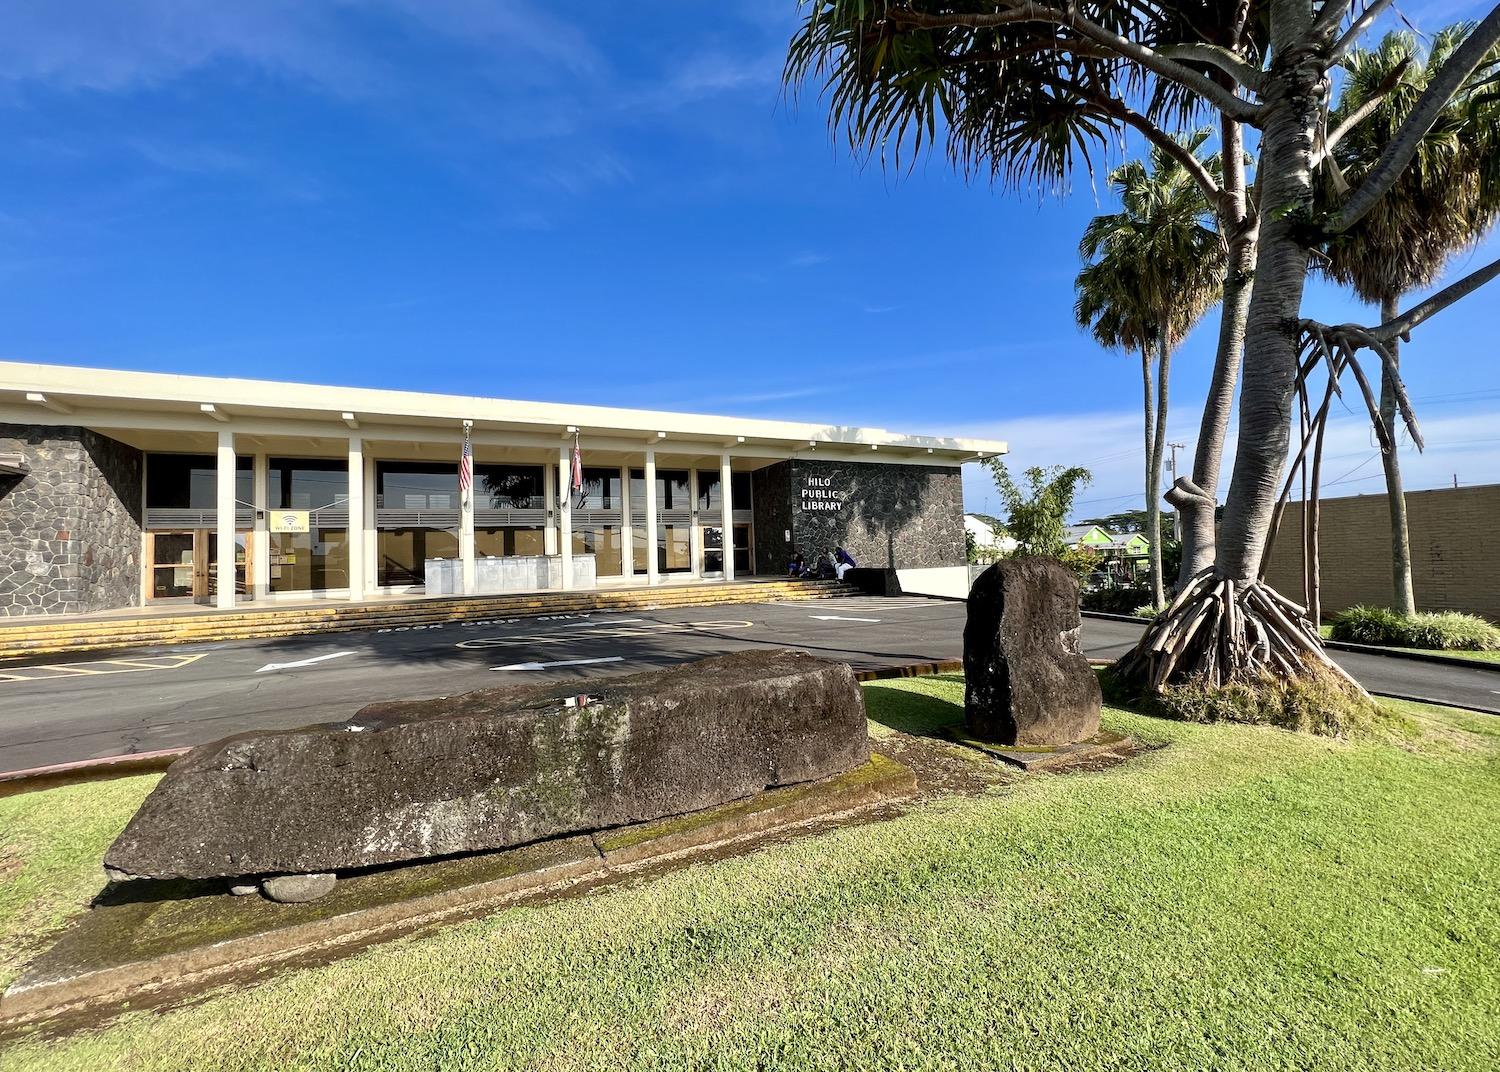 Outside Hilo Public Library, you can see the Naha Stone (left) that King Kamehameha I once lifted on his path to fulfilling a prophecy to unite the Hawaiian Islands.